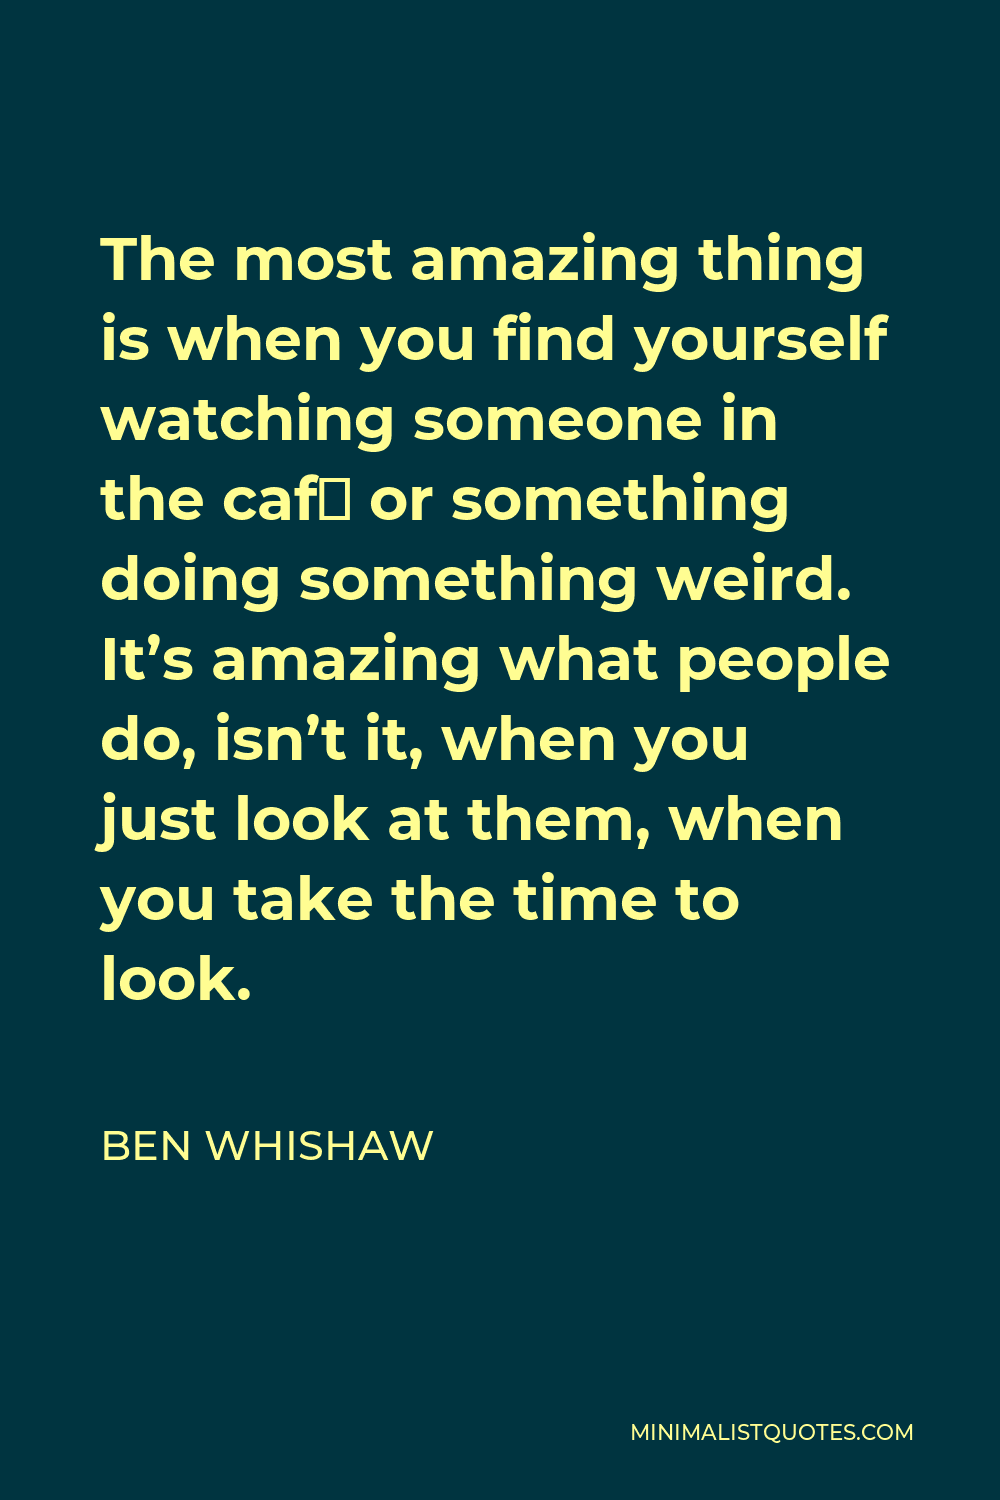 Ben Whishaw Quote - The most amazing thing is when you find yourself watching someone in the café or something doing something weird. It’s amazing what people do, isn’t it, when you just look at them, when you take the time to look.